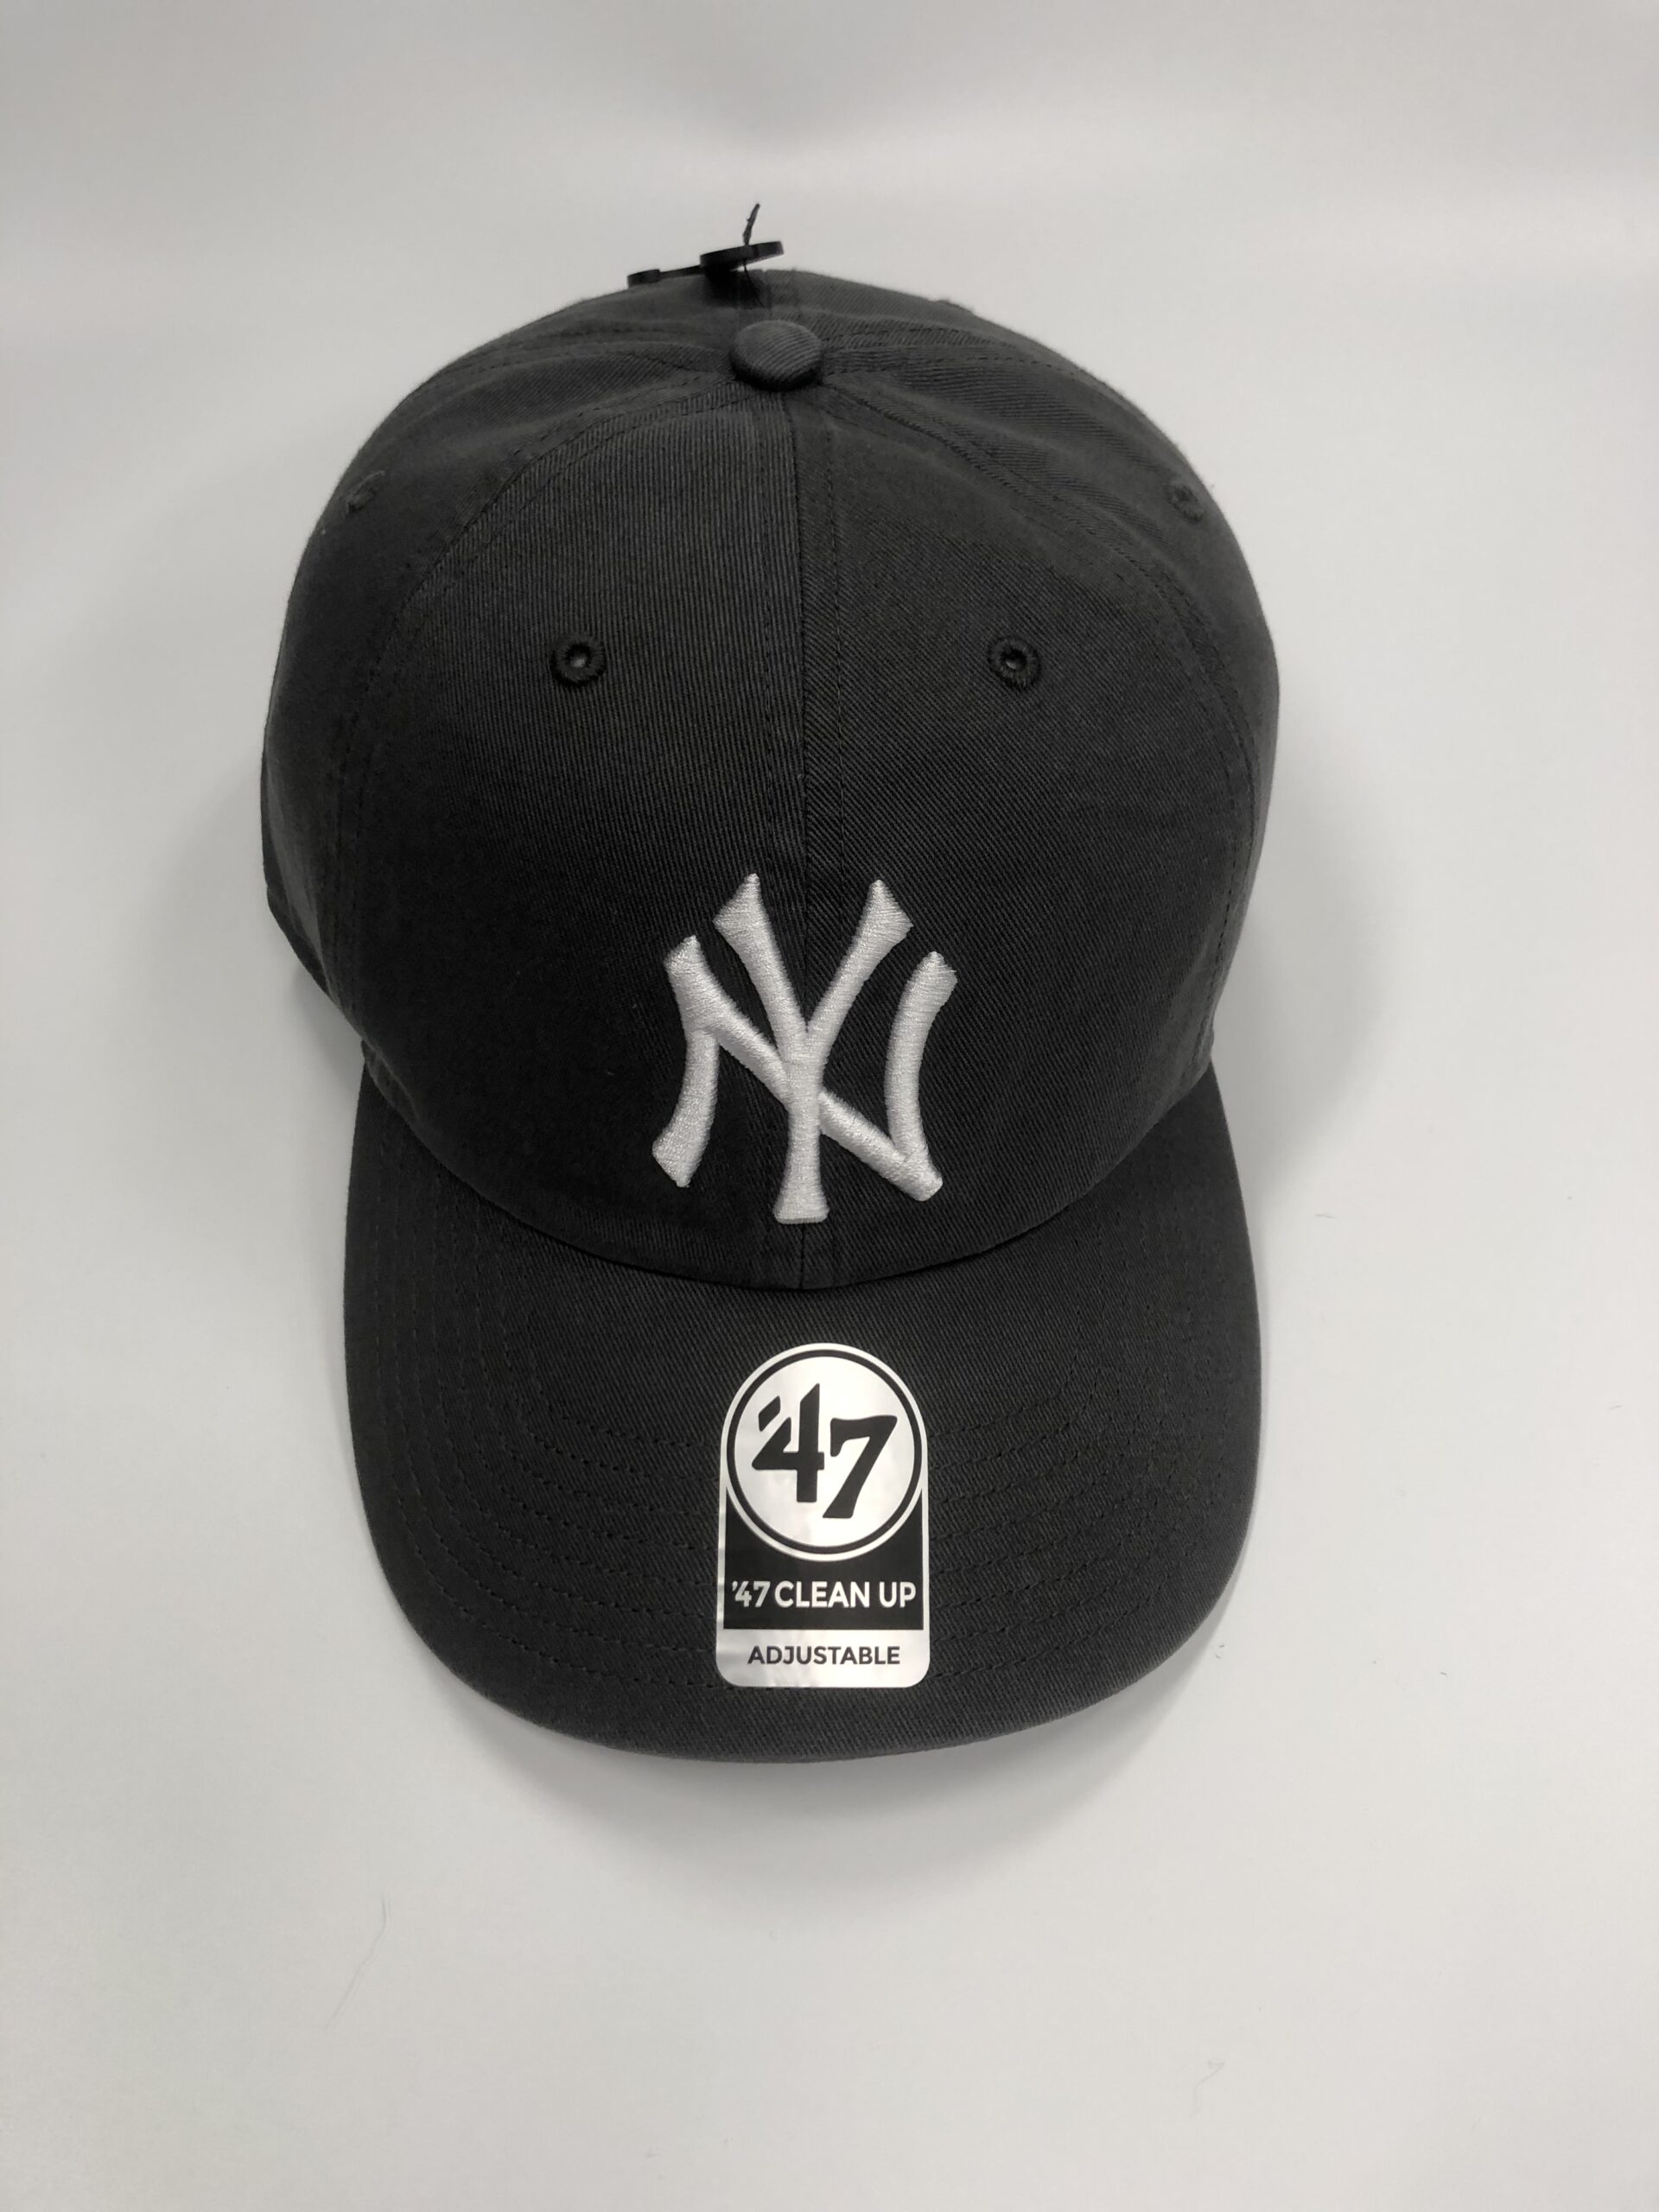 Yankees’47 CLEAN UP Charcoal